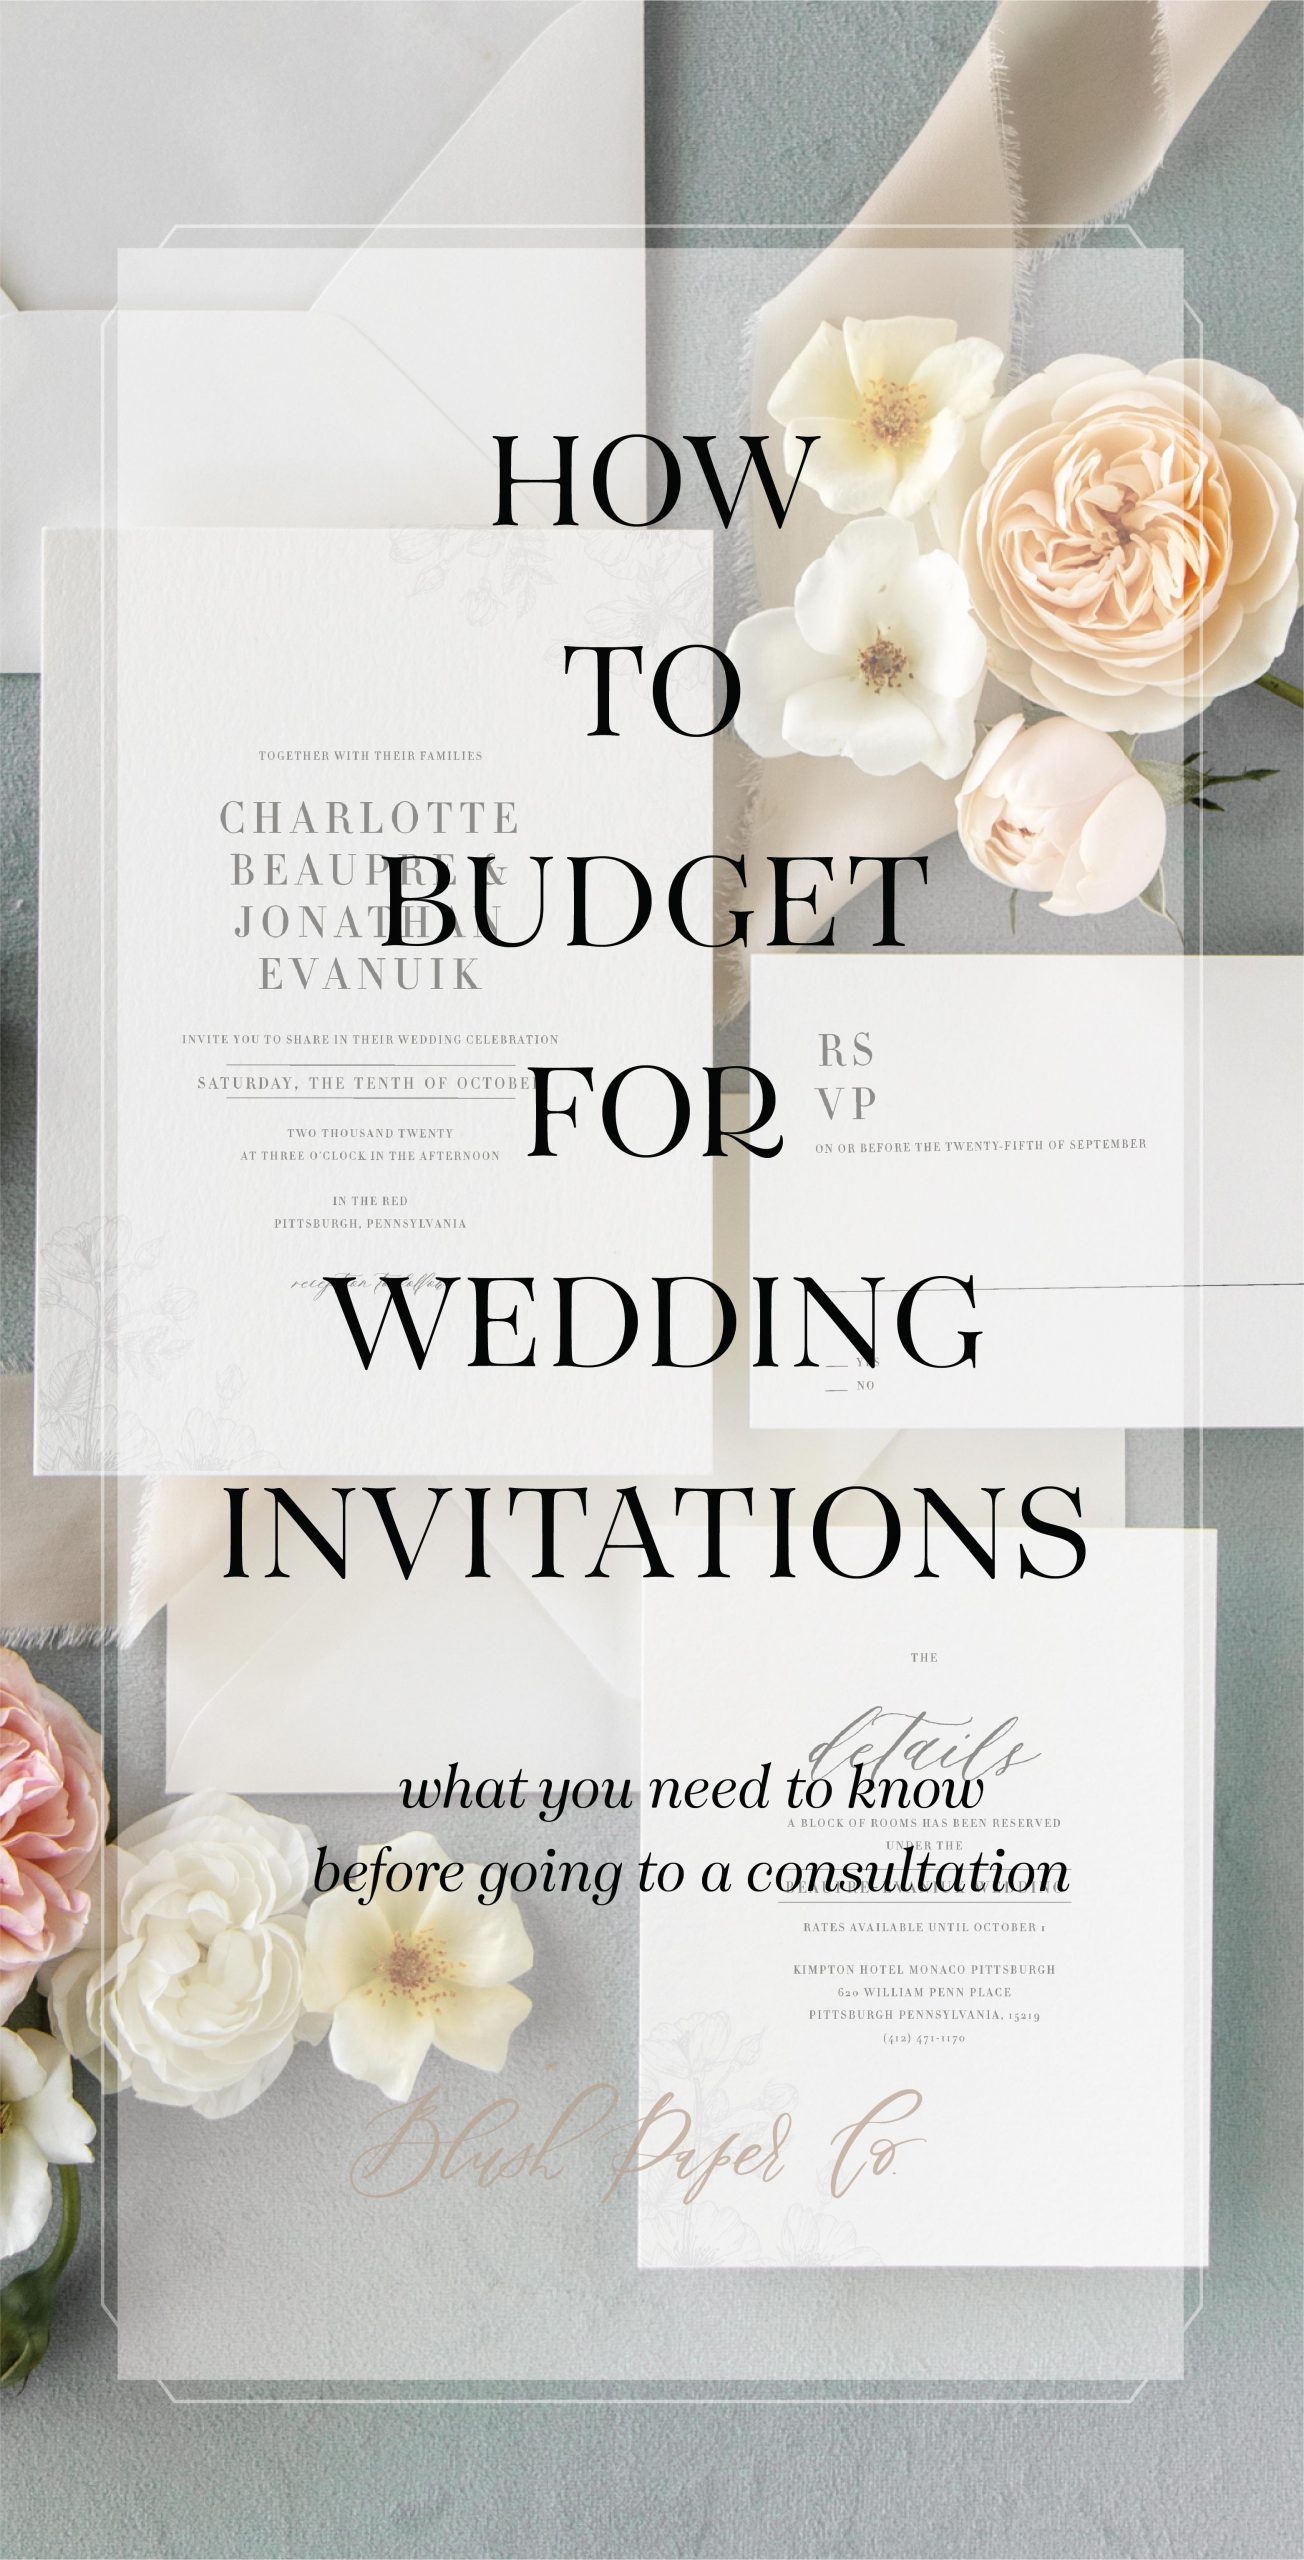 How to Budget for Wedding Invitations